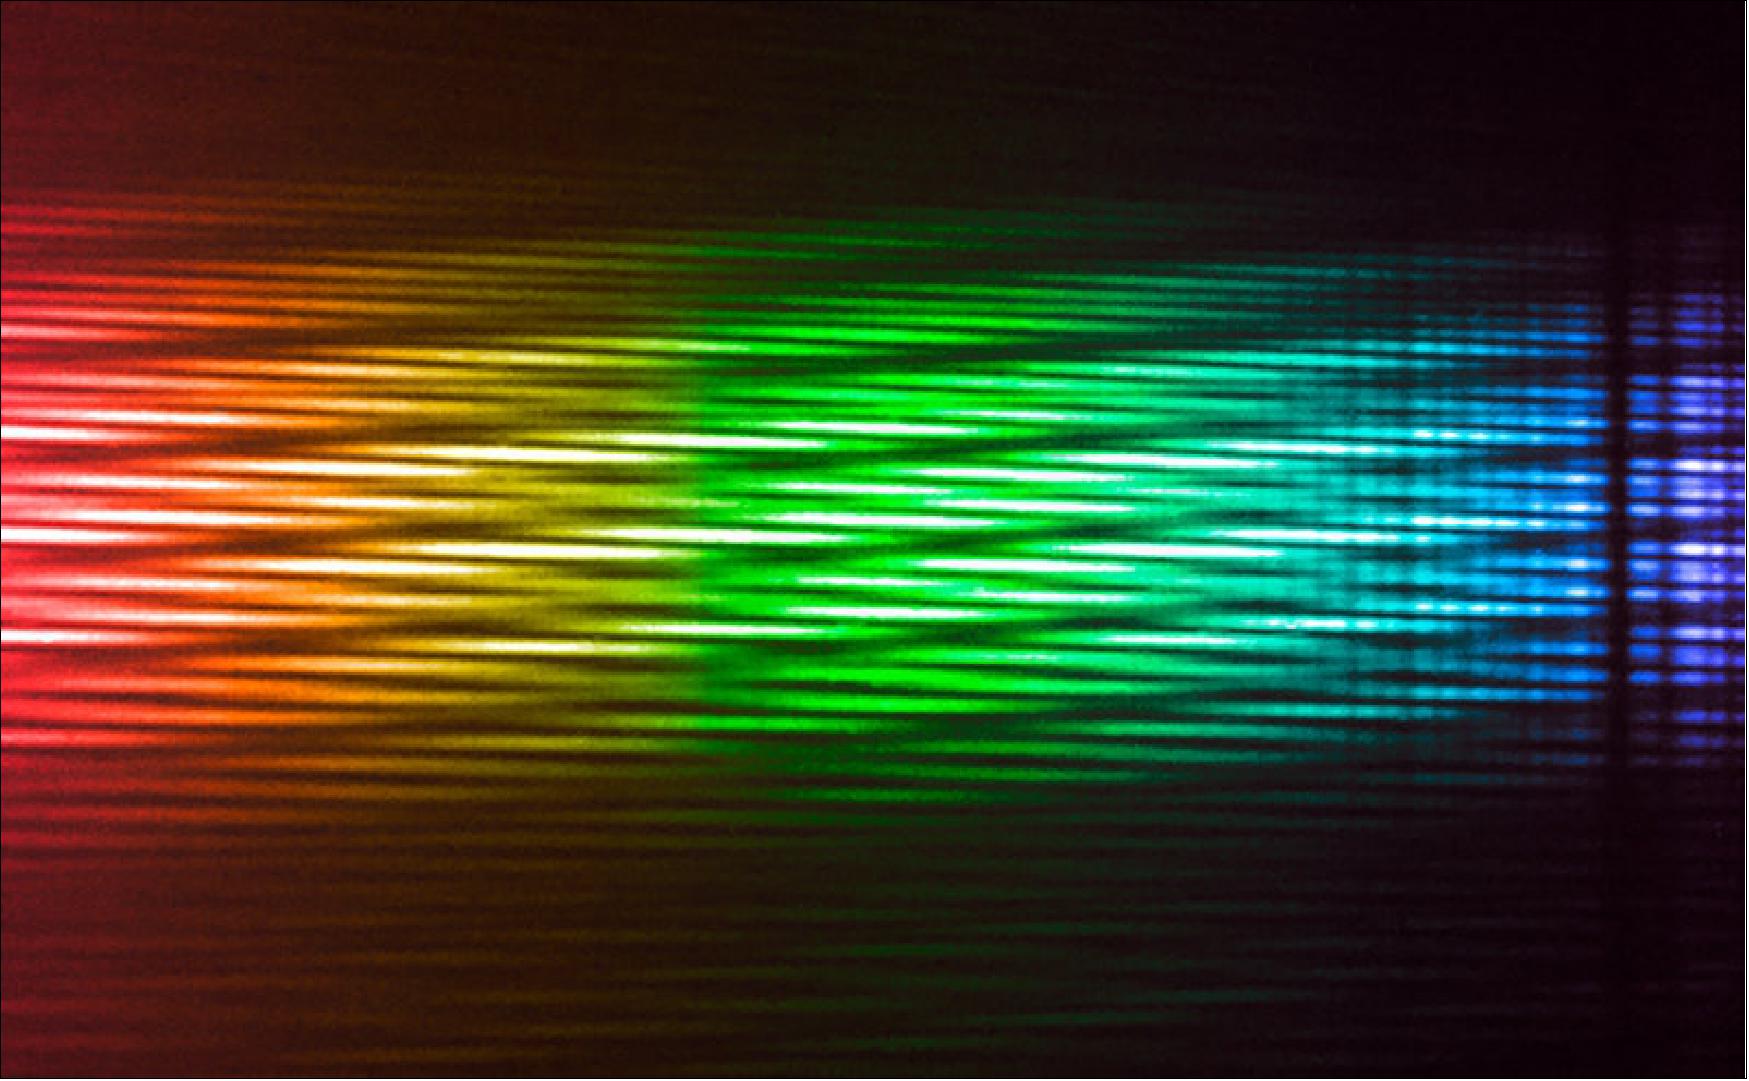 Figure 75: Four-telescope interferogram of the star Sirius recorded at “First light” observations on 18 February 2018 with VLTI-MATISSE. This image is a colorized version of the interferogram recorded at infrared wavelengths. Blue color corresponds to short infrared wavelengths, red corresponds to long wavelengths. The colors illustrate the changing wavelengths of the data. Interferograms are the raw data required for reconstructing high-resolution images of astronomical objects (image credit: ESO/MATISSE Consortium)